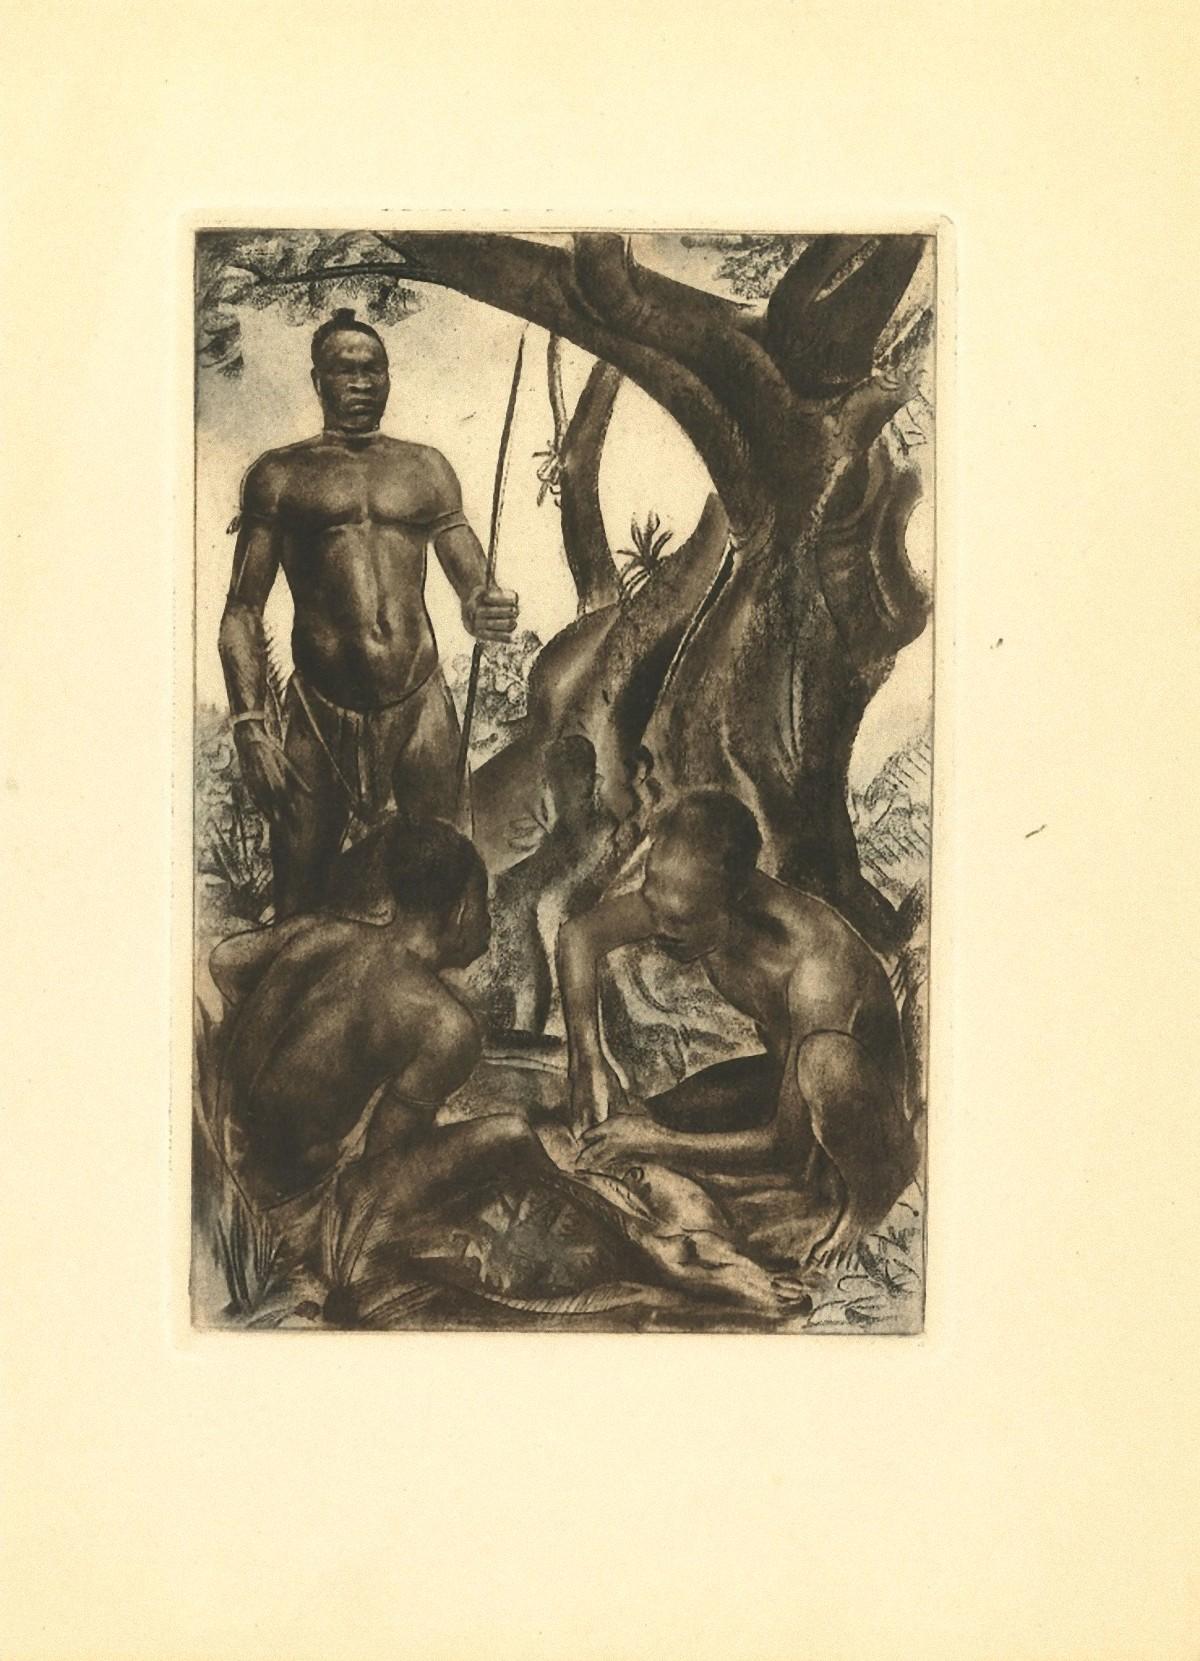 Africa - Hunters is an original artwork realized by Emmanuel Gondouin (Versailles, 1883 - Parigi, 1934) in 1930s.

Original Lithograph, part of a collection entitled "Africa".

The work is glued on cardboard.

Good condition.

Emmanuel Gondouin is a